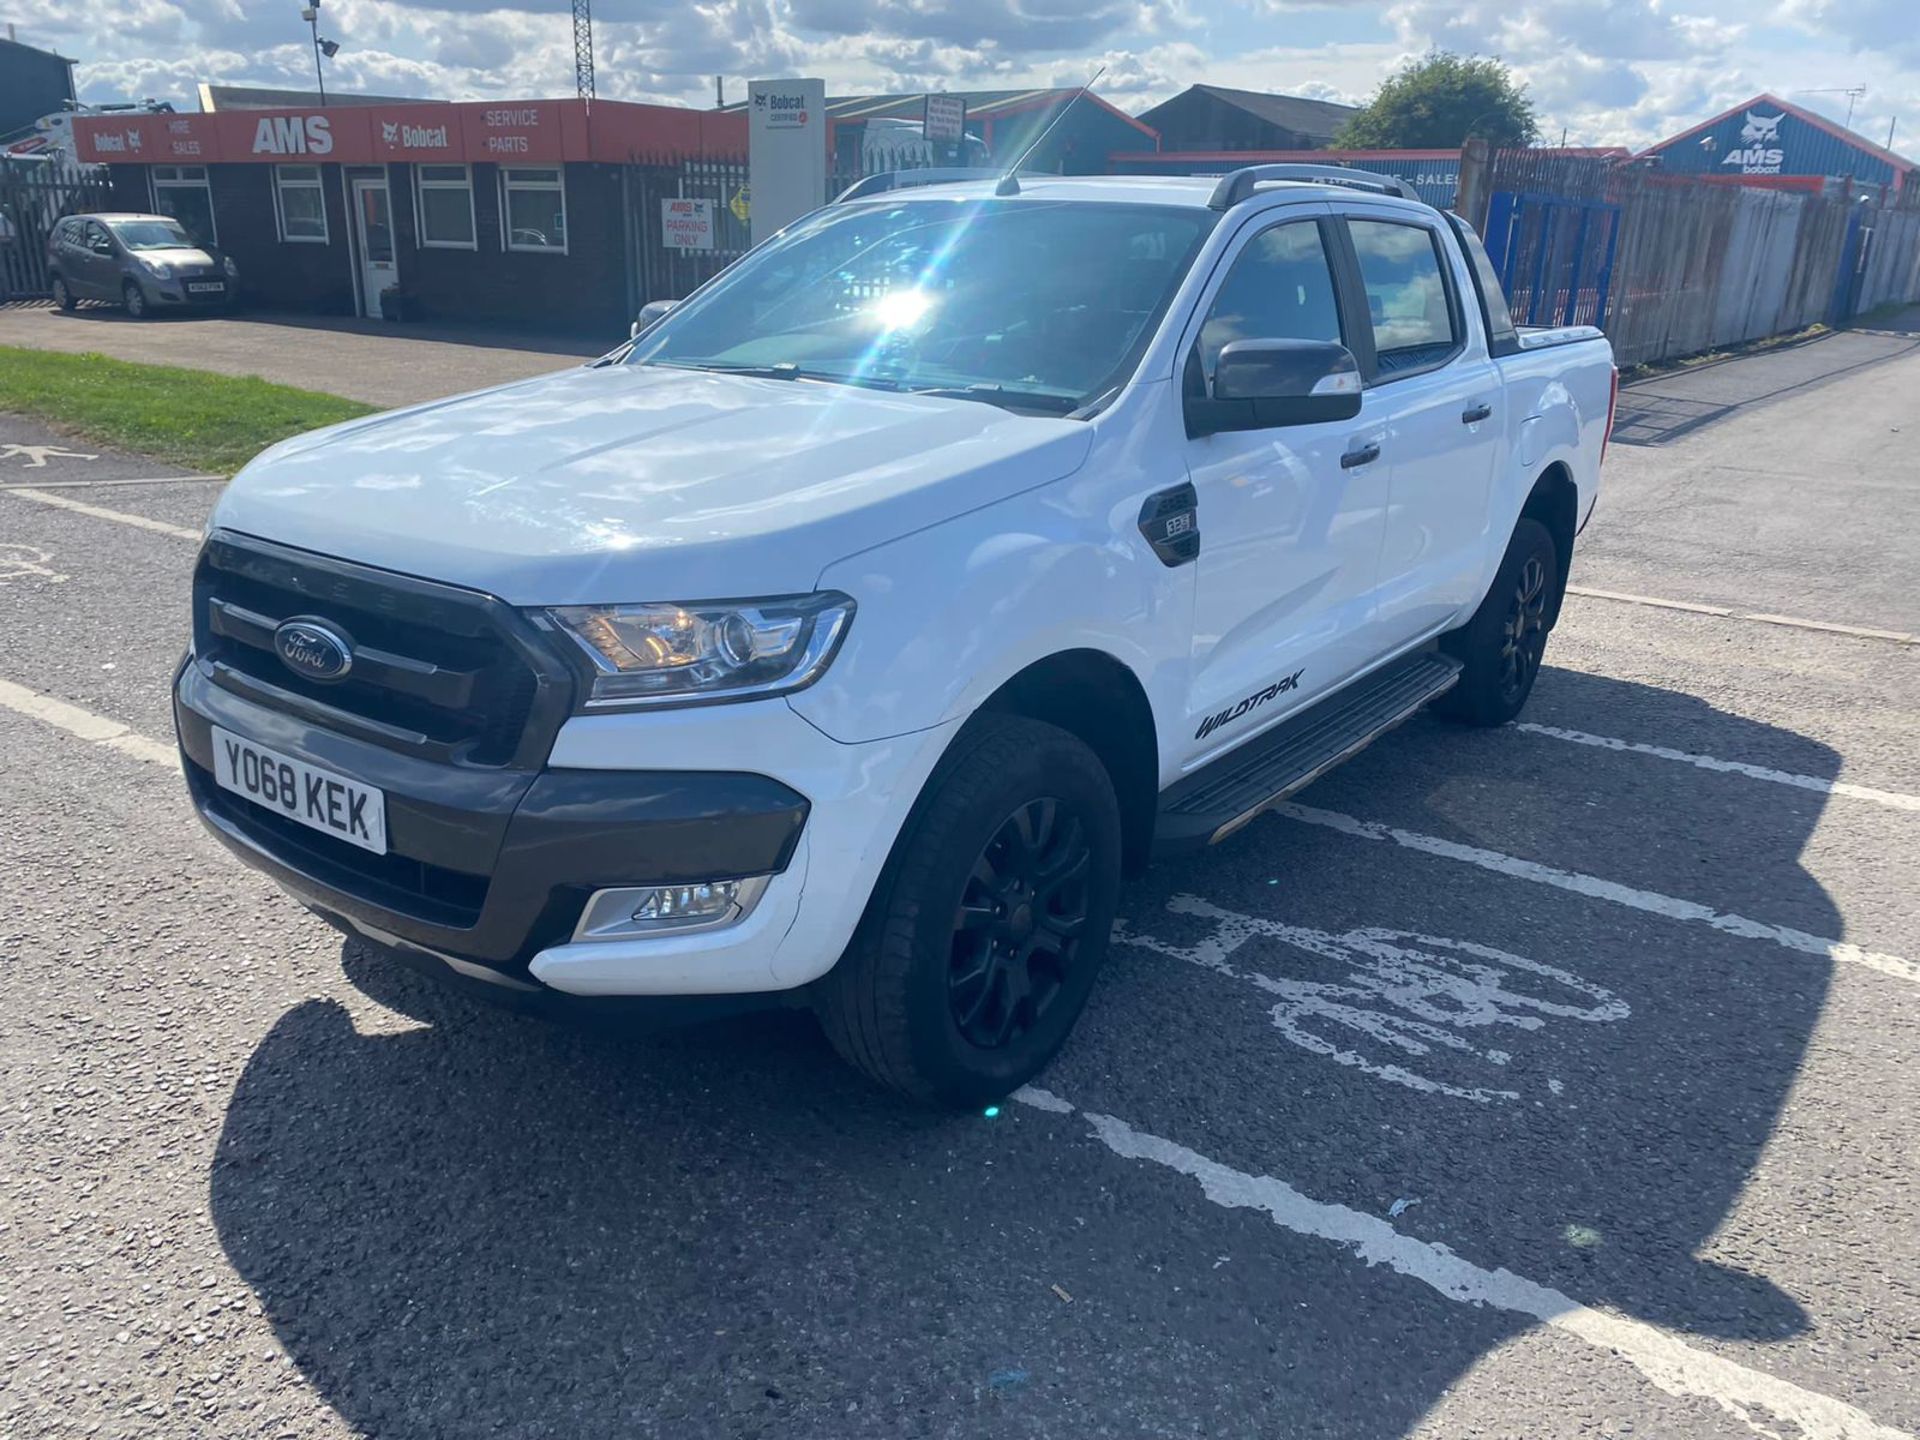 2018 68 Ford Ranger Wildtrak Pick up - 58k miles - 3.2 automatic - Alloy wheels - Leather seats - Image 3 of 9